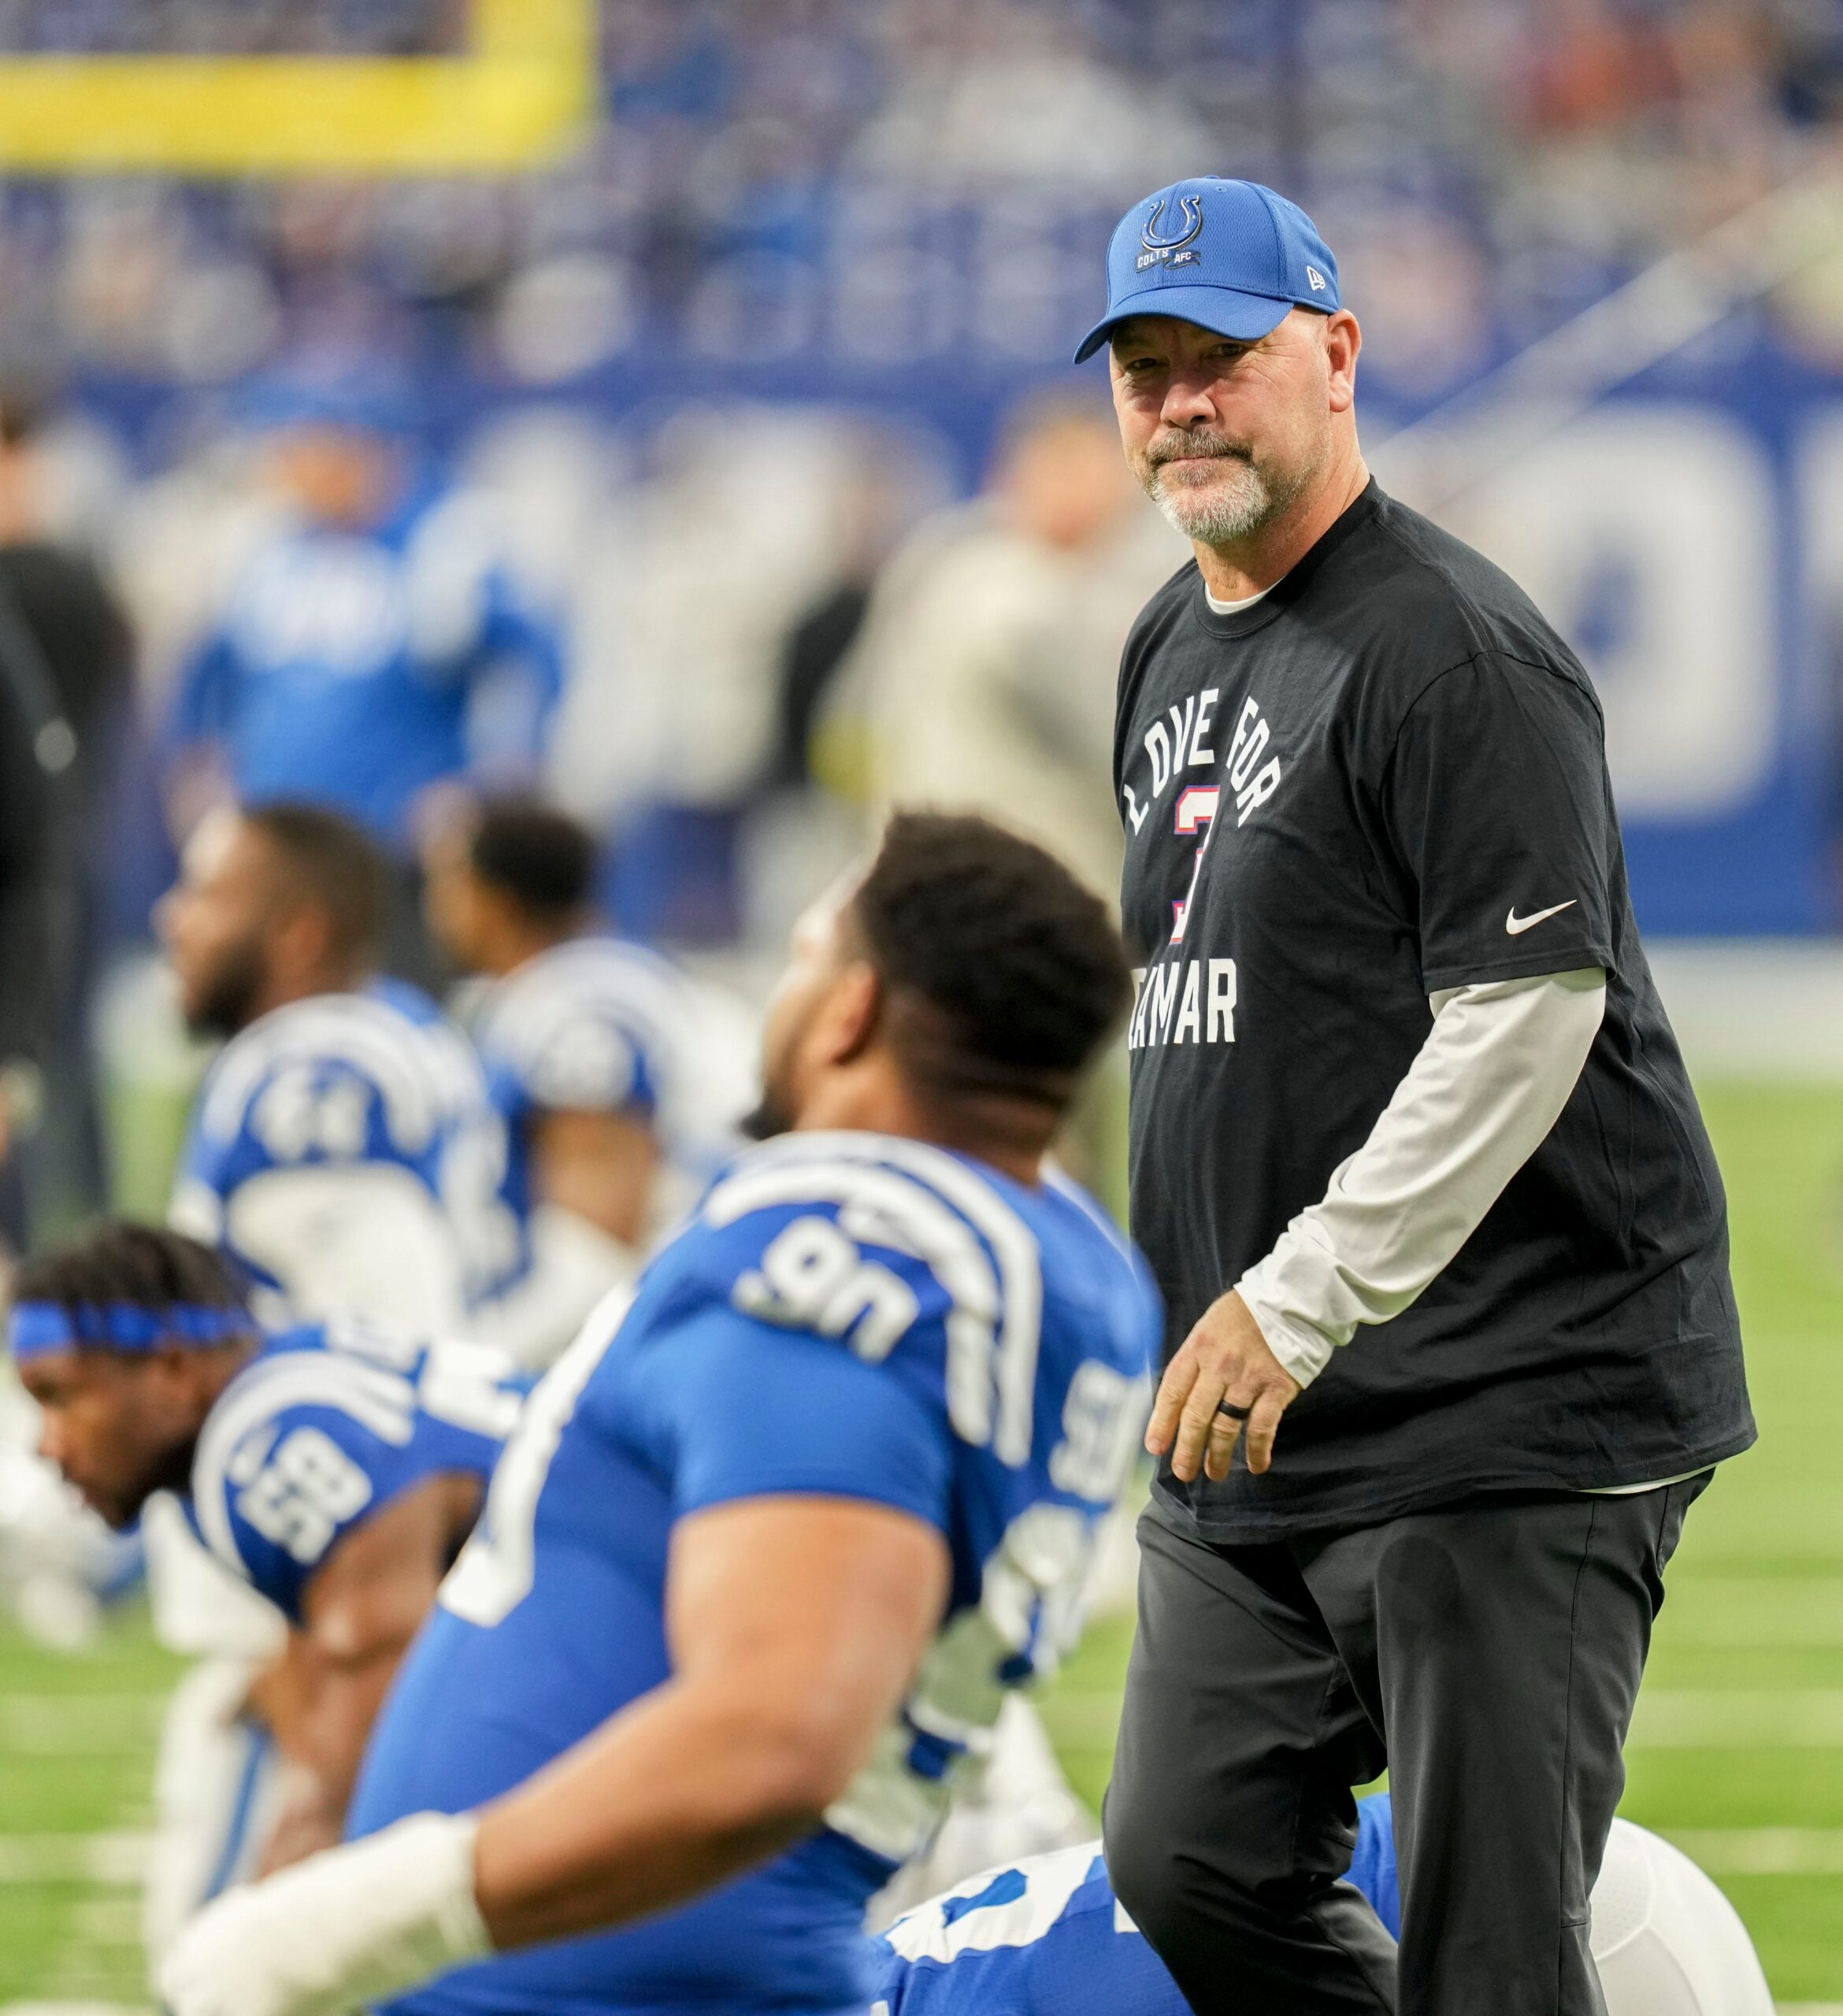 Shane Steichen To Call Colts' Plays, Does Not Commit To Retaining